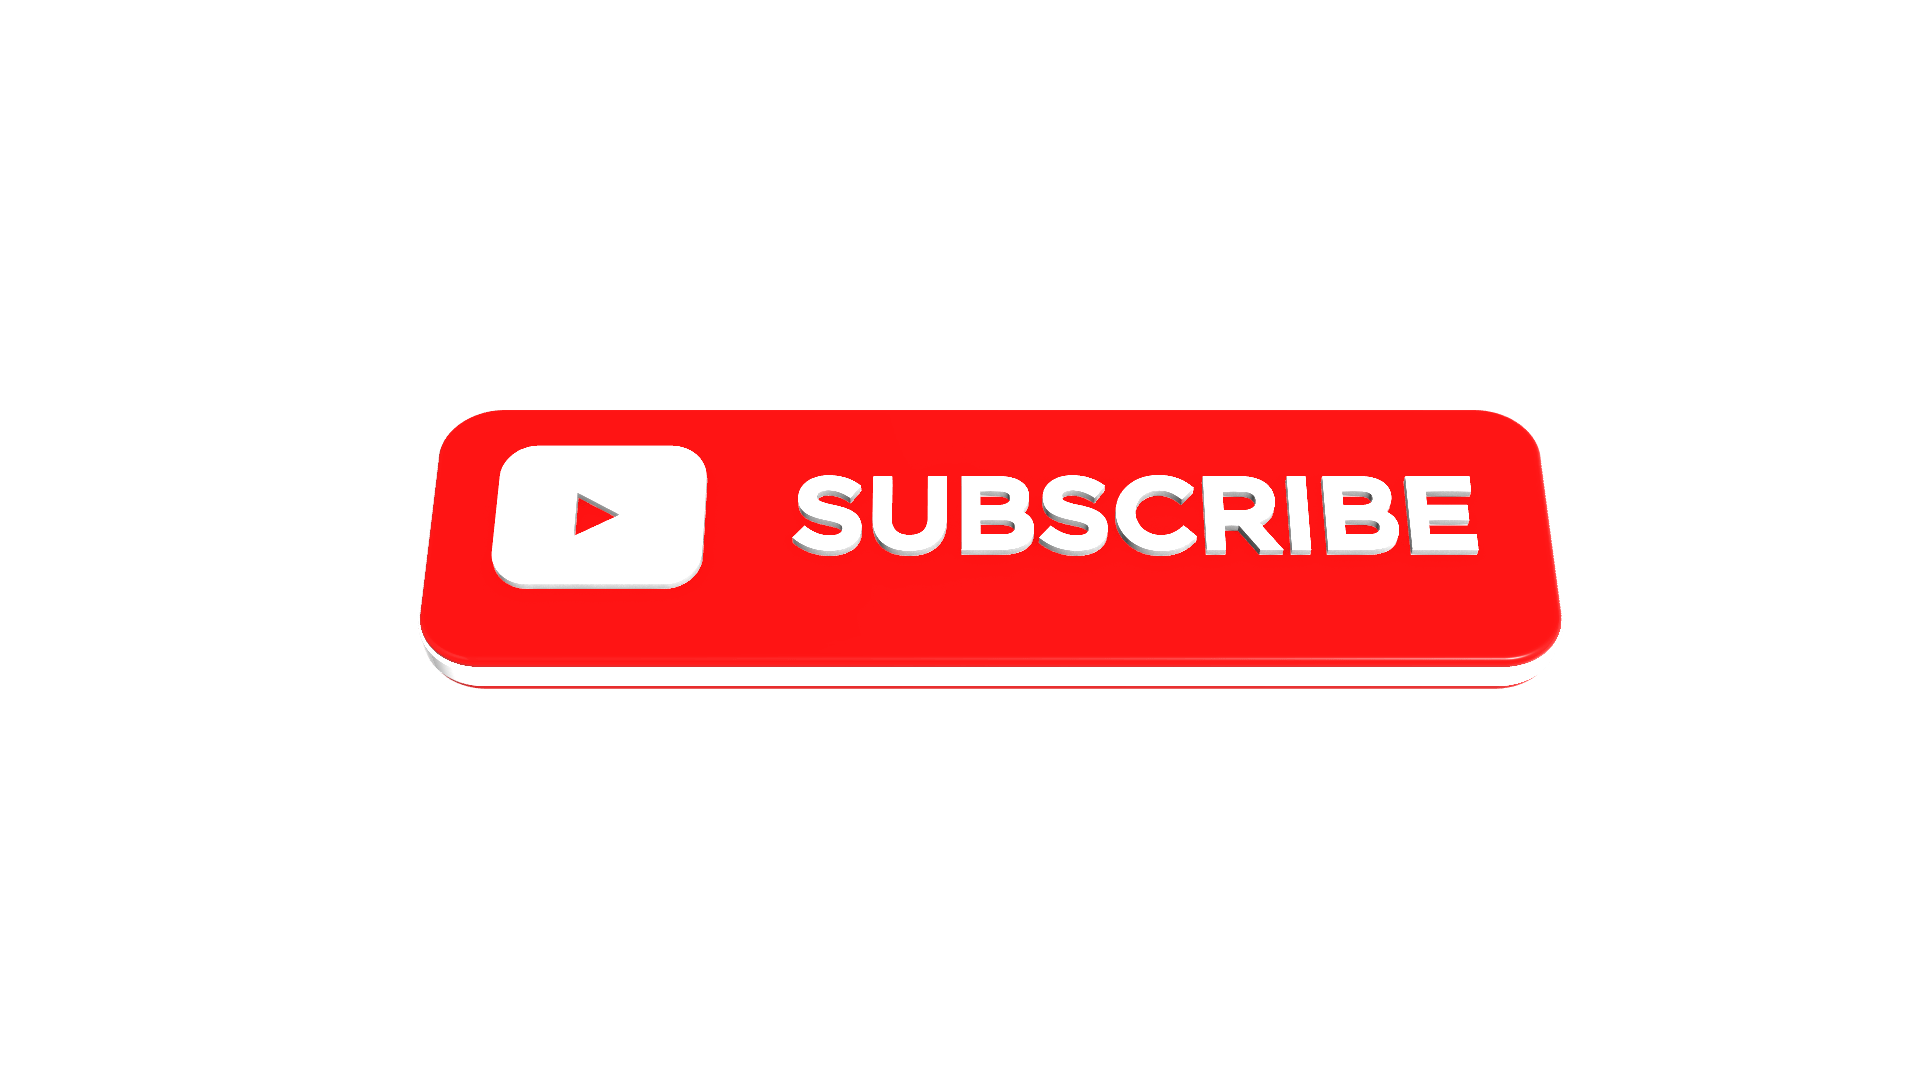 Download Free Subscribe, Like, Dislike, Save, Share, Buttons Png